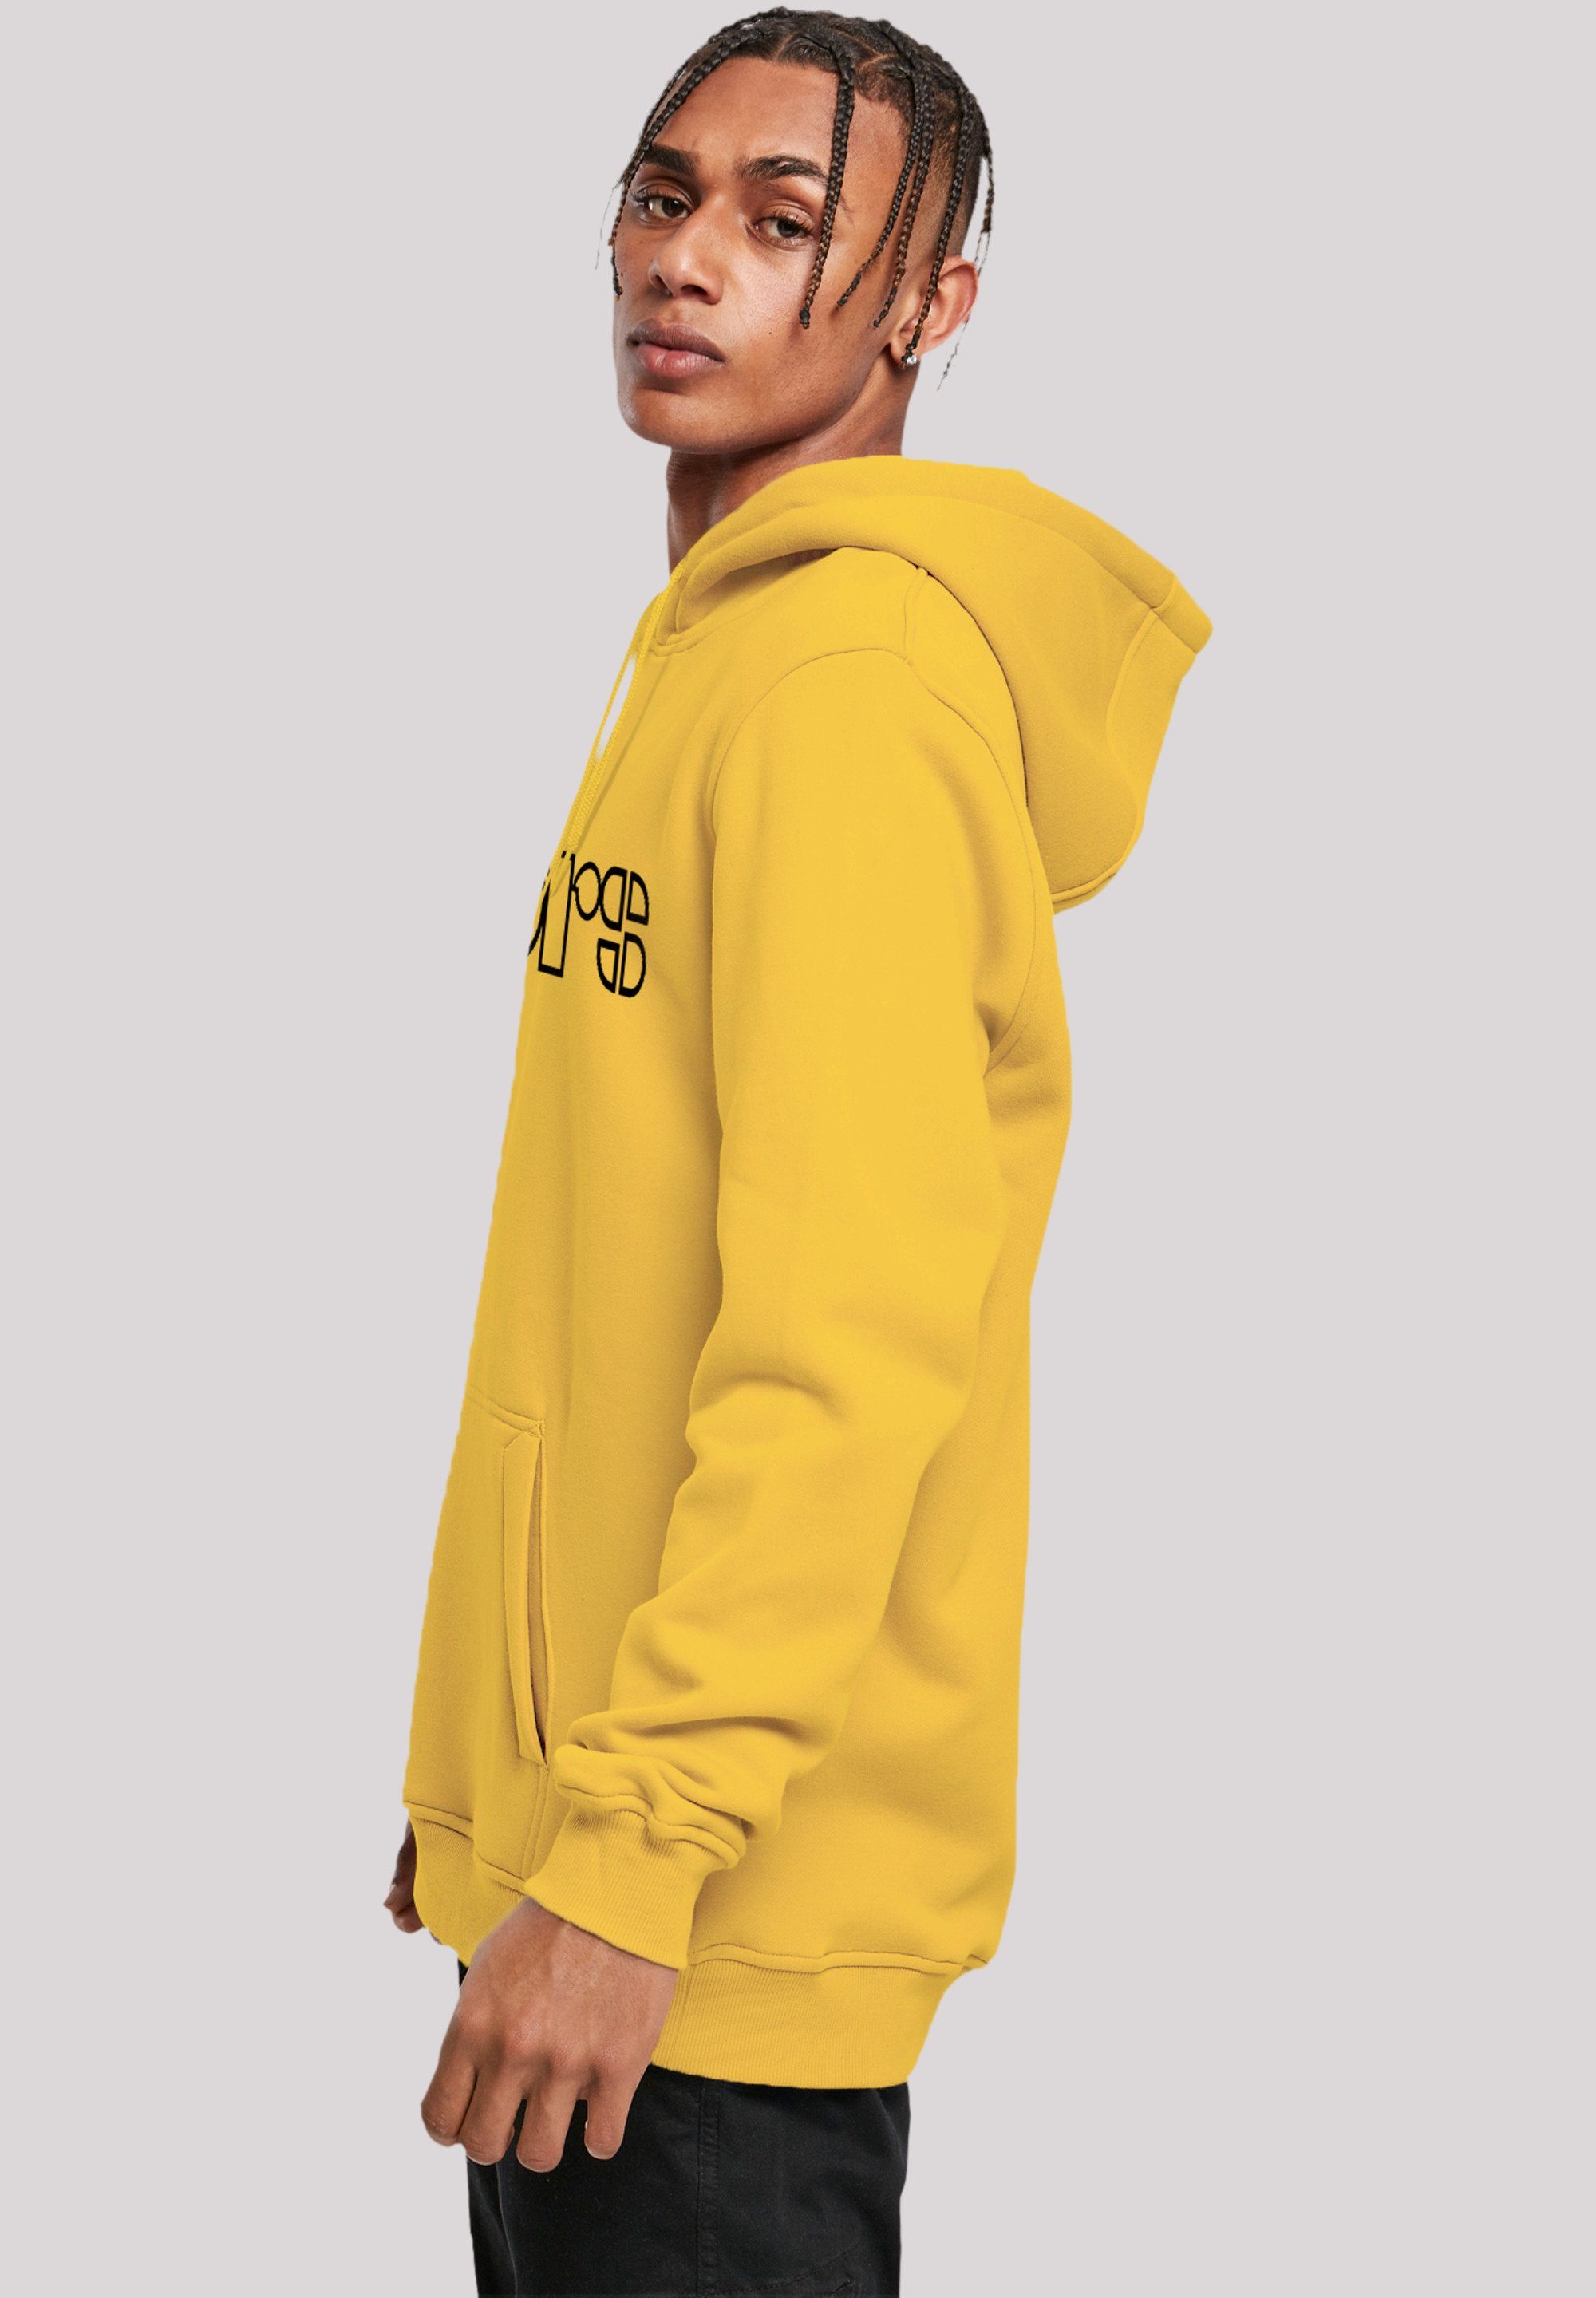 Logo yellow Premium Band Simple taxi Music Doors Logo The Hoodie Band, F4NT4STIC Qualität,